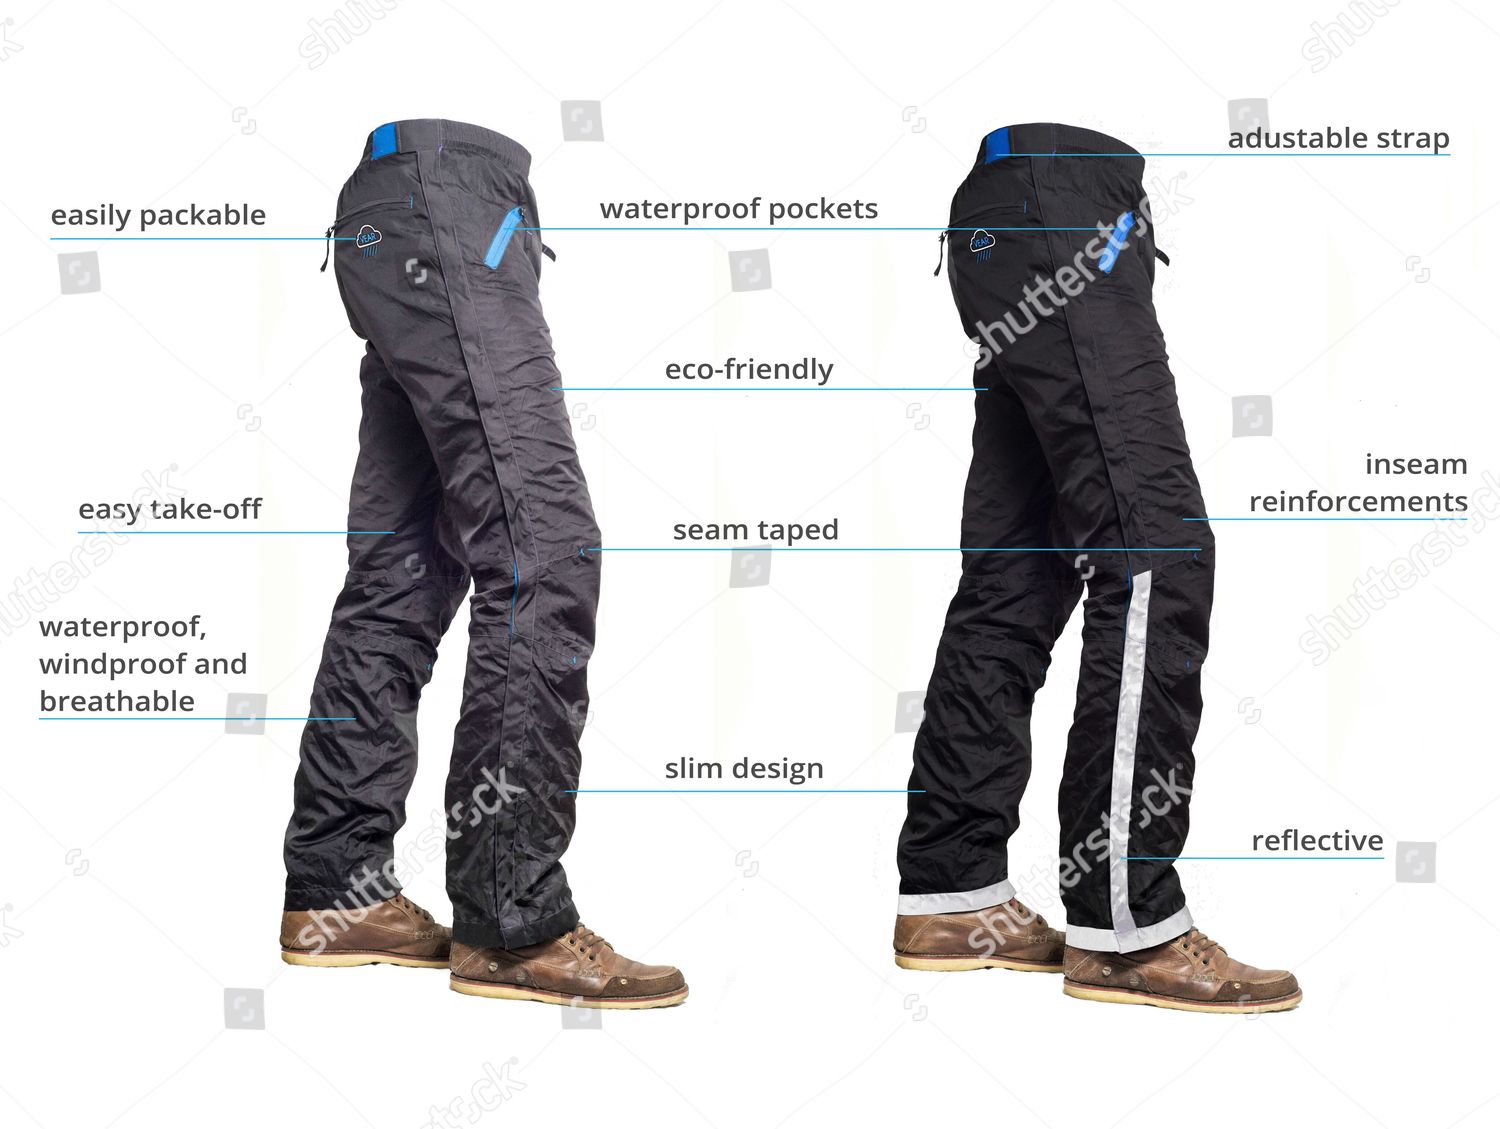 zip off cycling trousers